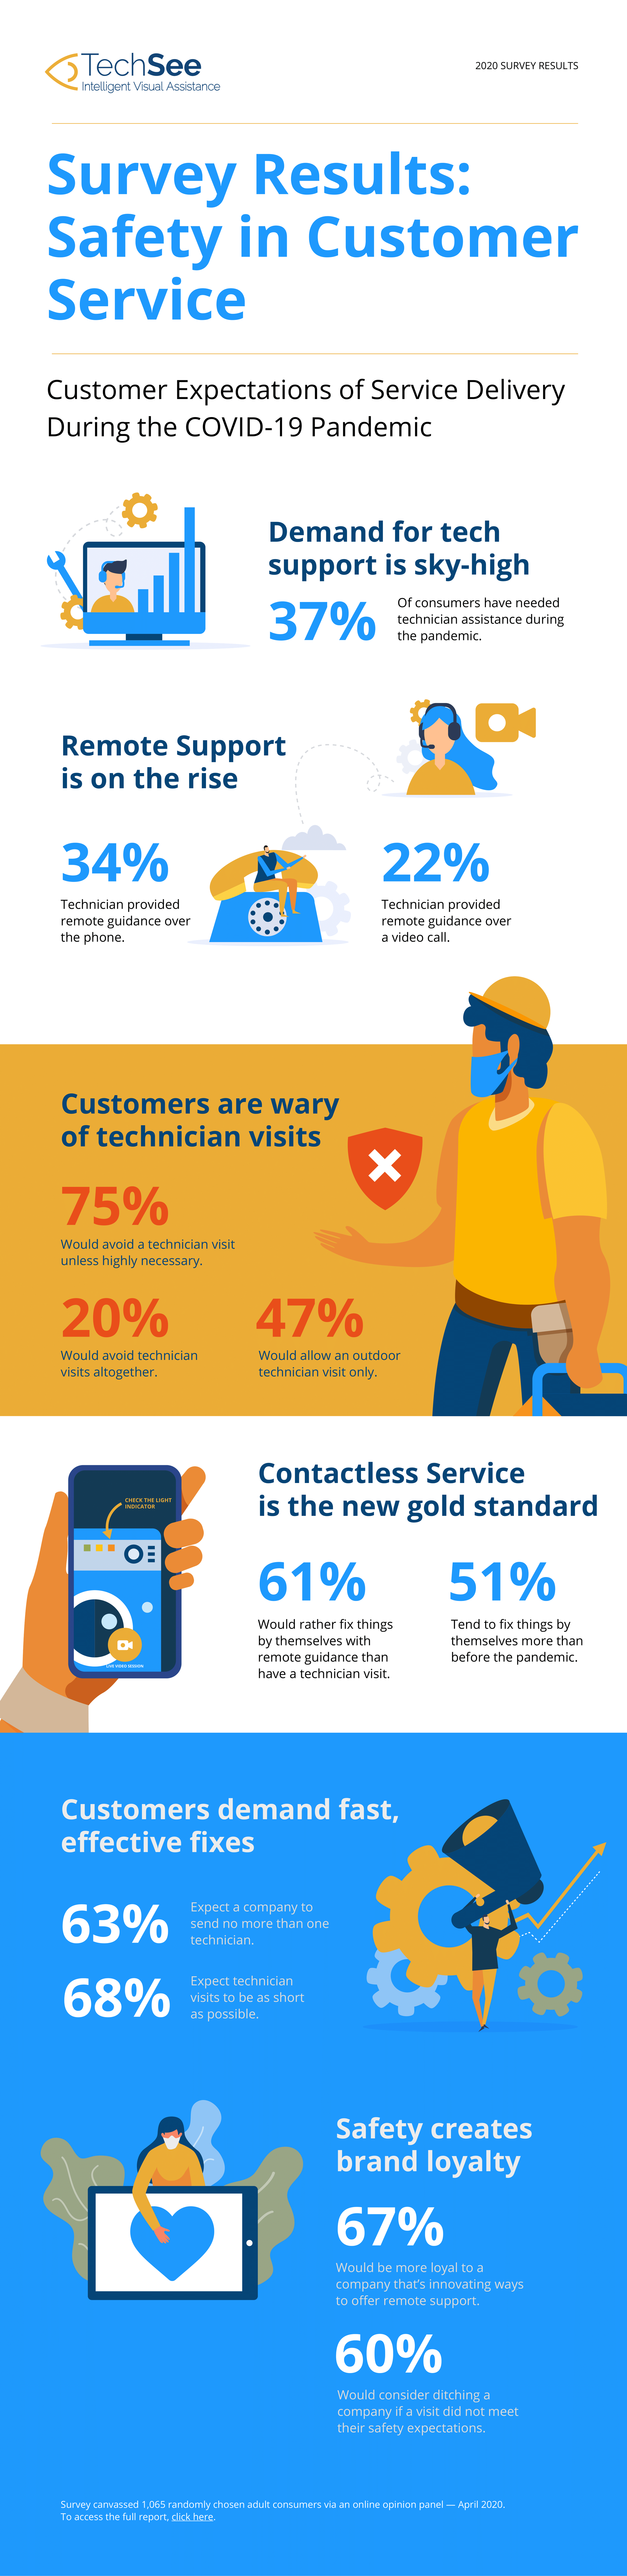 Survey Results: Safety in Customer Service - Infographic